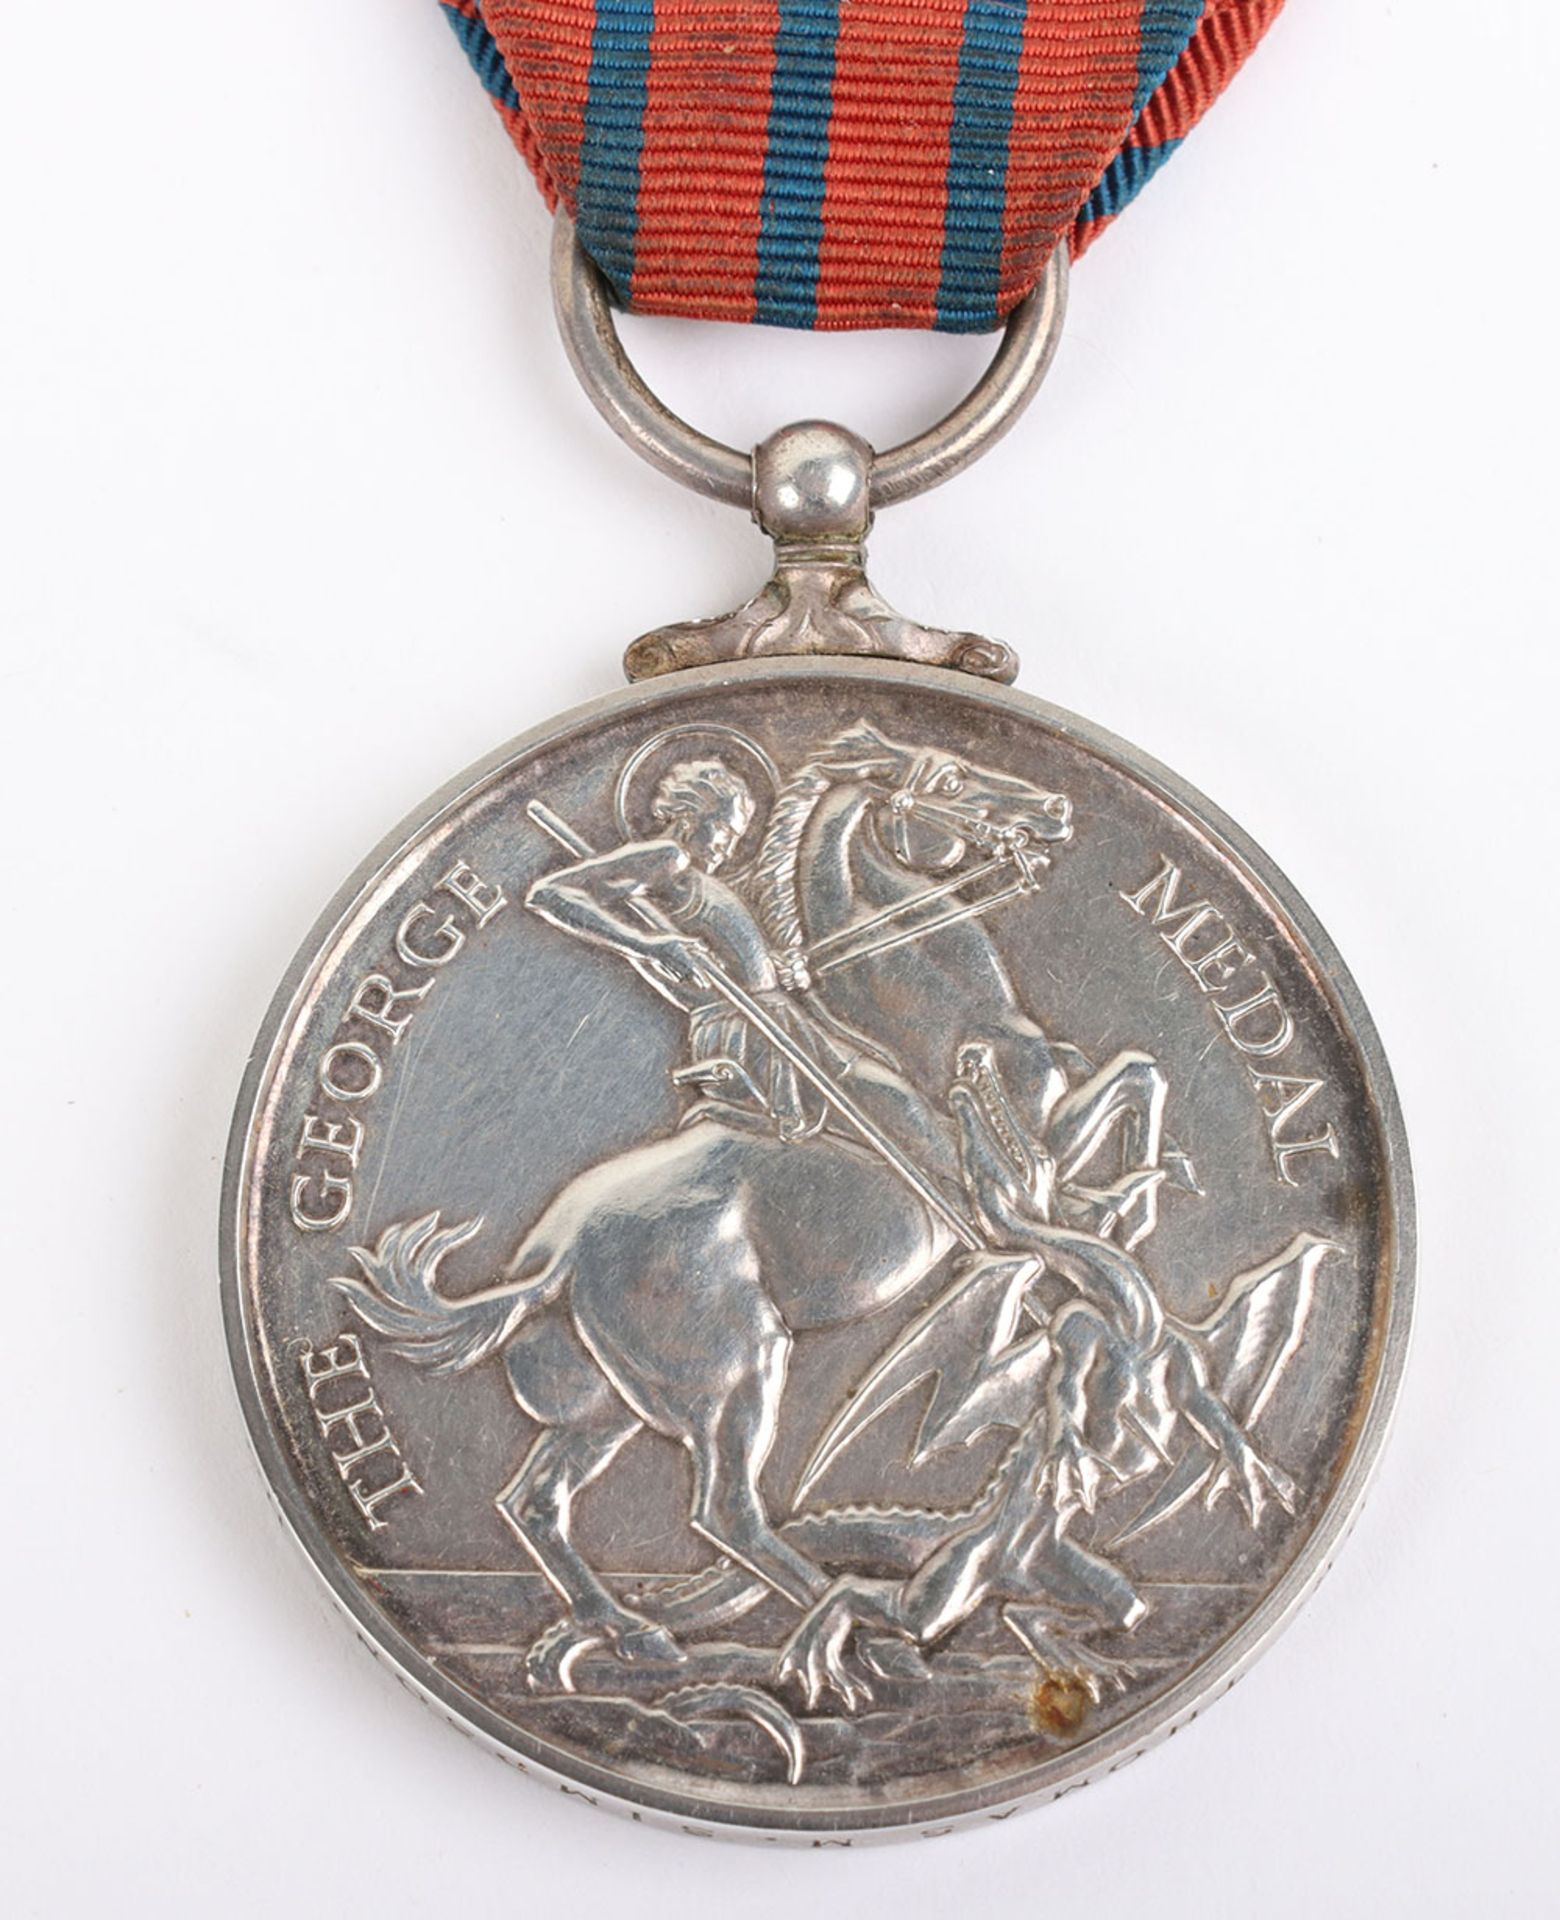 Second World War Birmingham Blitz Home Guard George Medal Awarded for Gallantry in Rescuing People T - Image 4 of 8